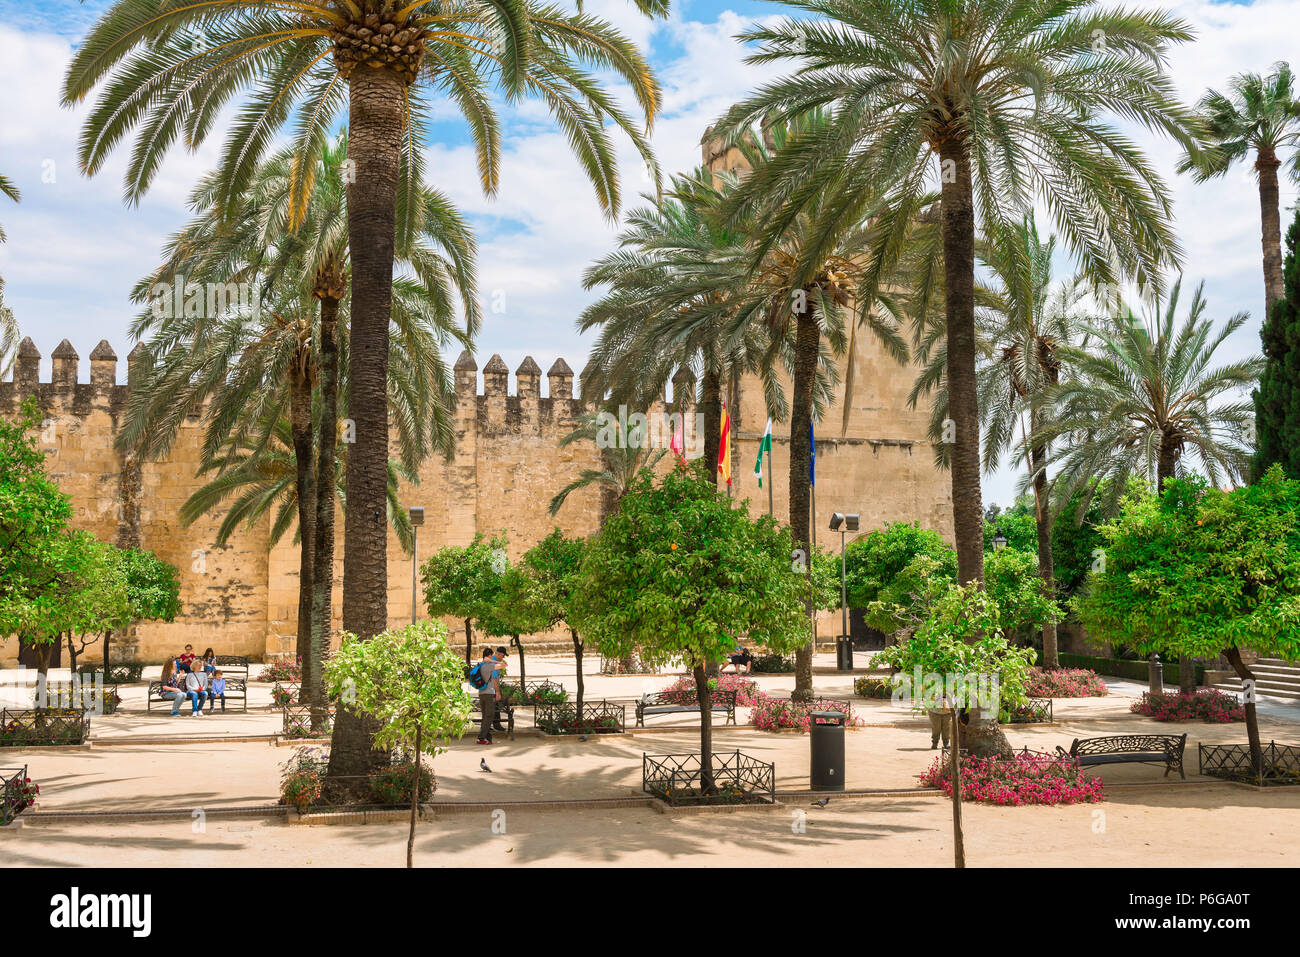 Cordoba Alcazar, view from the Calle Caballerizas Reales across the palm tree lined plaza in front of the Alcazar de Los Reyes Cristianos, Cordoba. Stock Photo